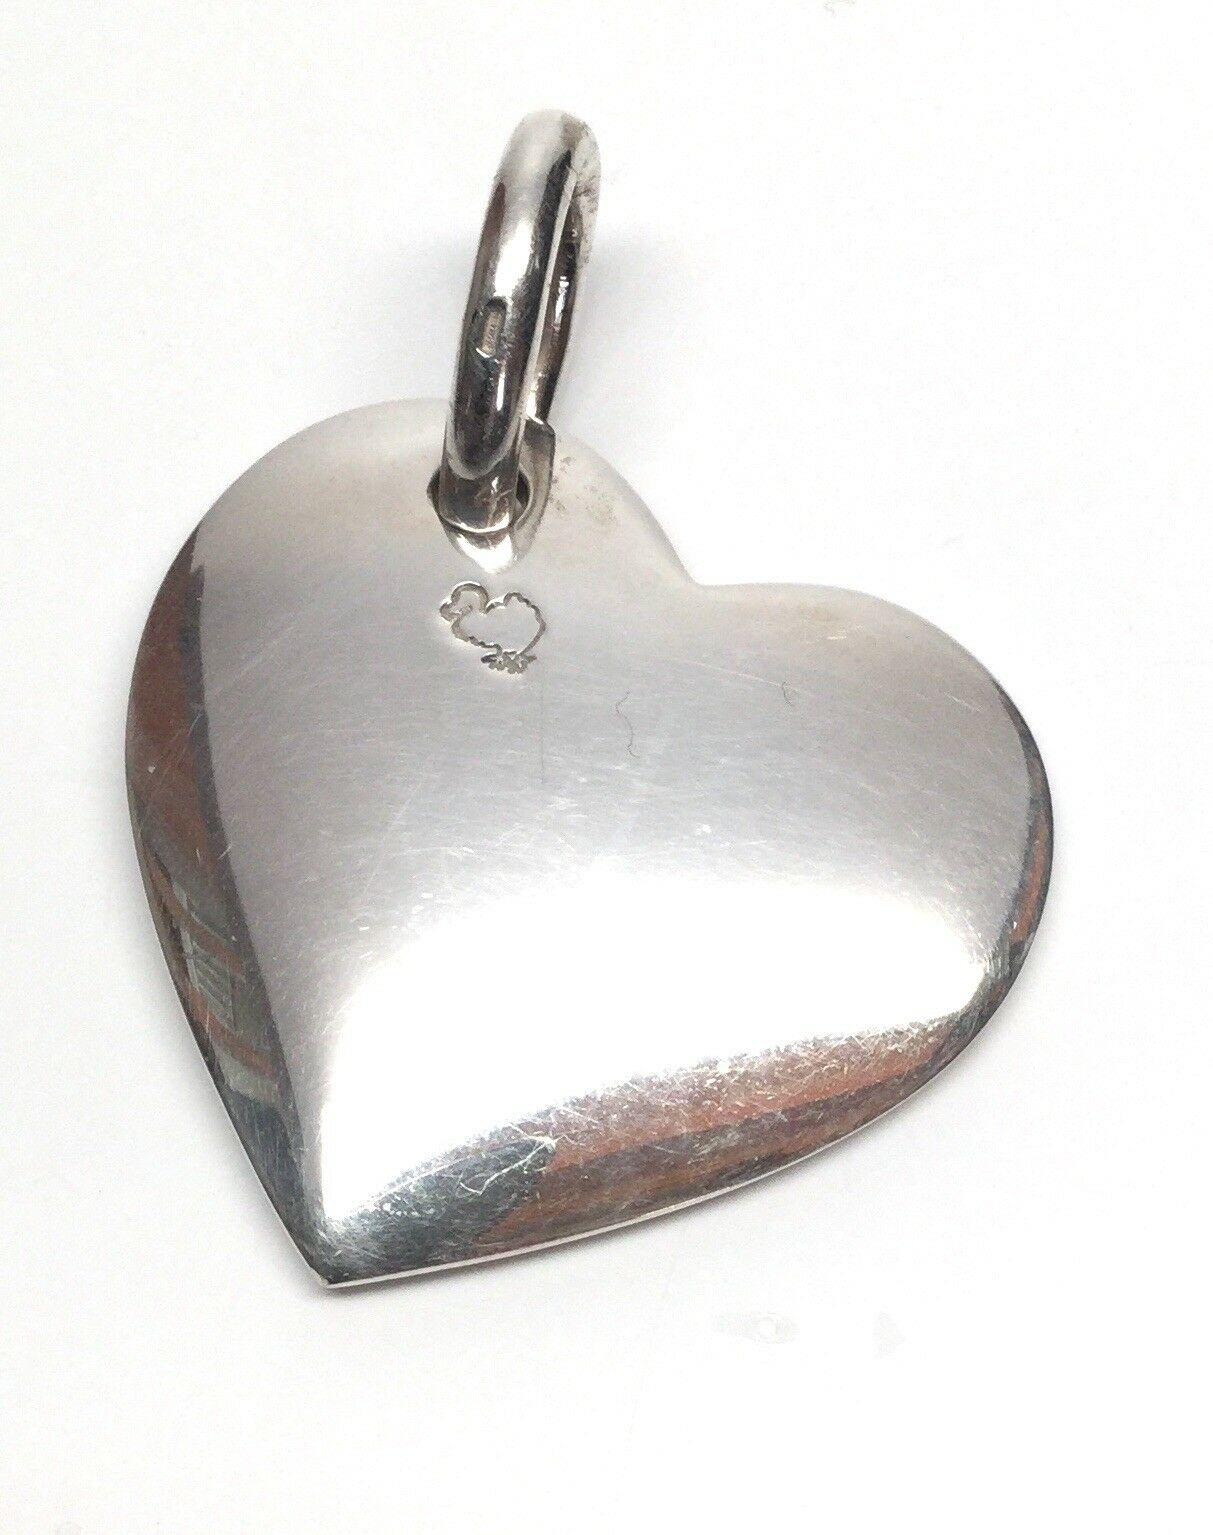 Sterling Silver Pomellato Dodo Heavy Sterling Silver Heart Pendant Necklace
This is a big solid chunky heavy sterling silver heart. It's quite beautiful as it dangles at an angle.  The back of the heart is hallmarked with a dodo bird. This is the